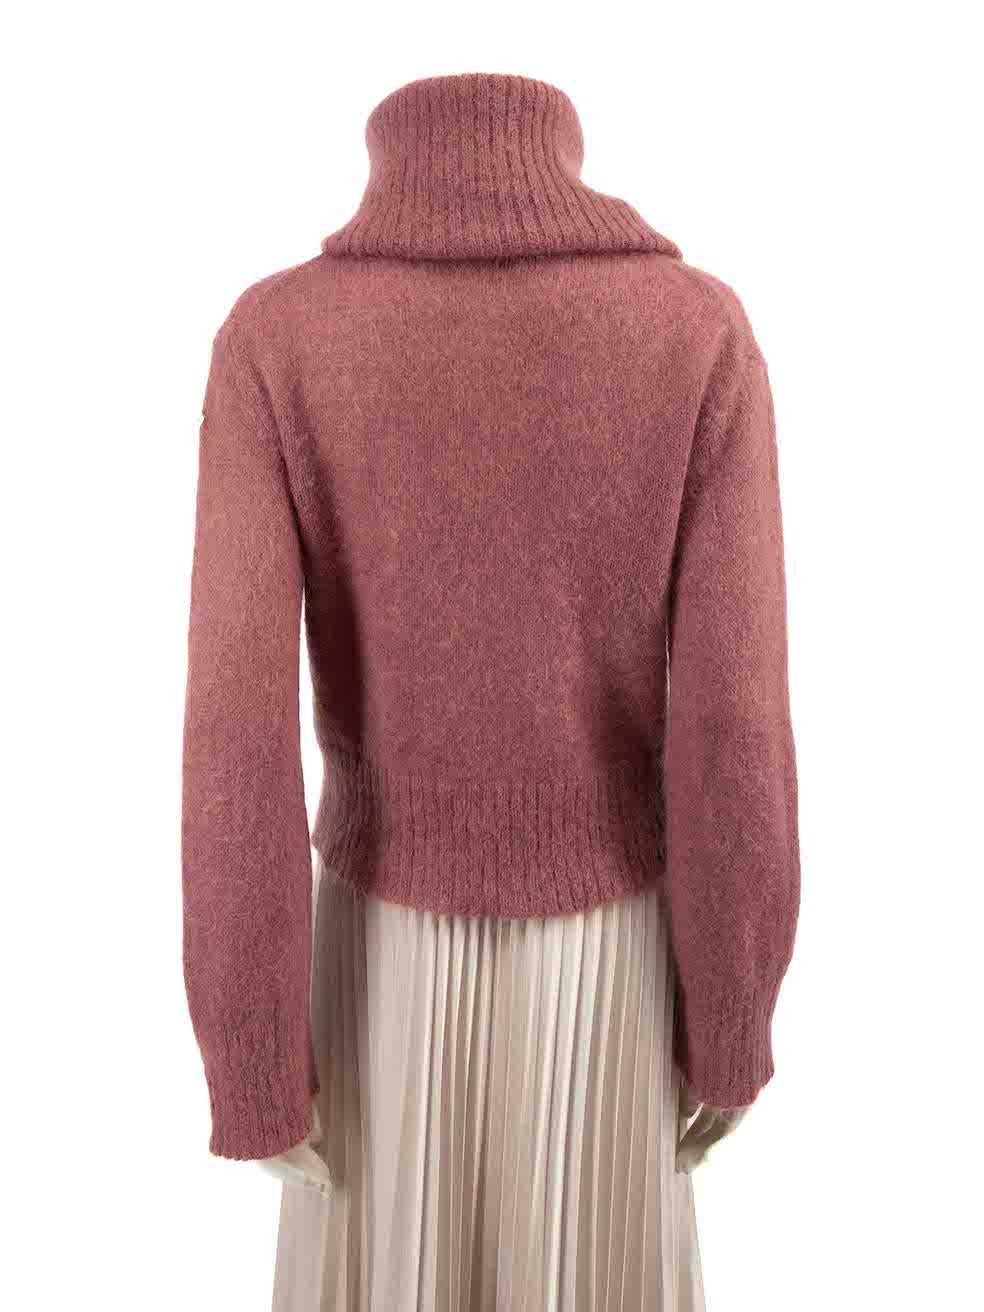 Moncler Pink Turtleneck Jumper Size L In Good Condition For Sale In London, GB